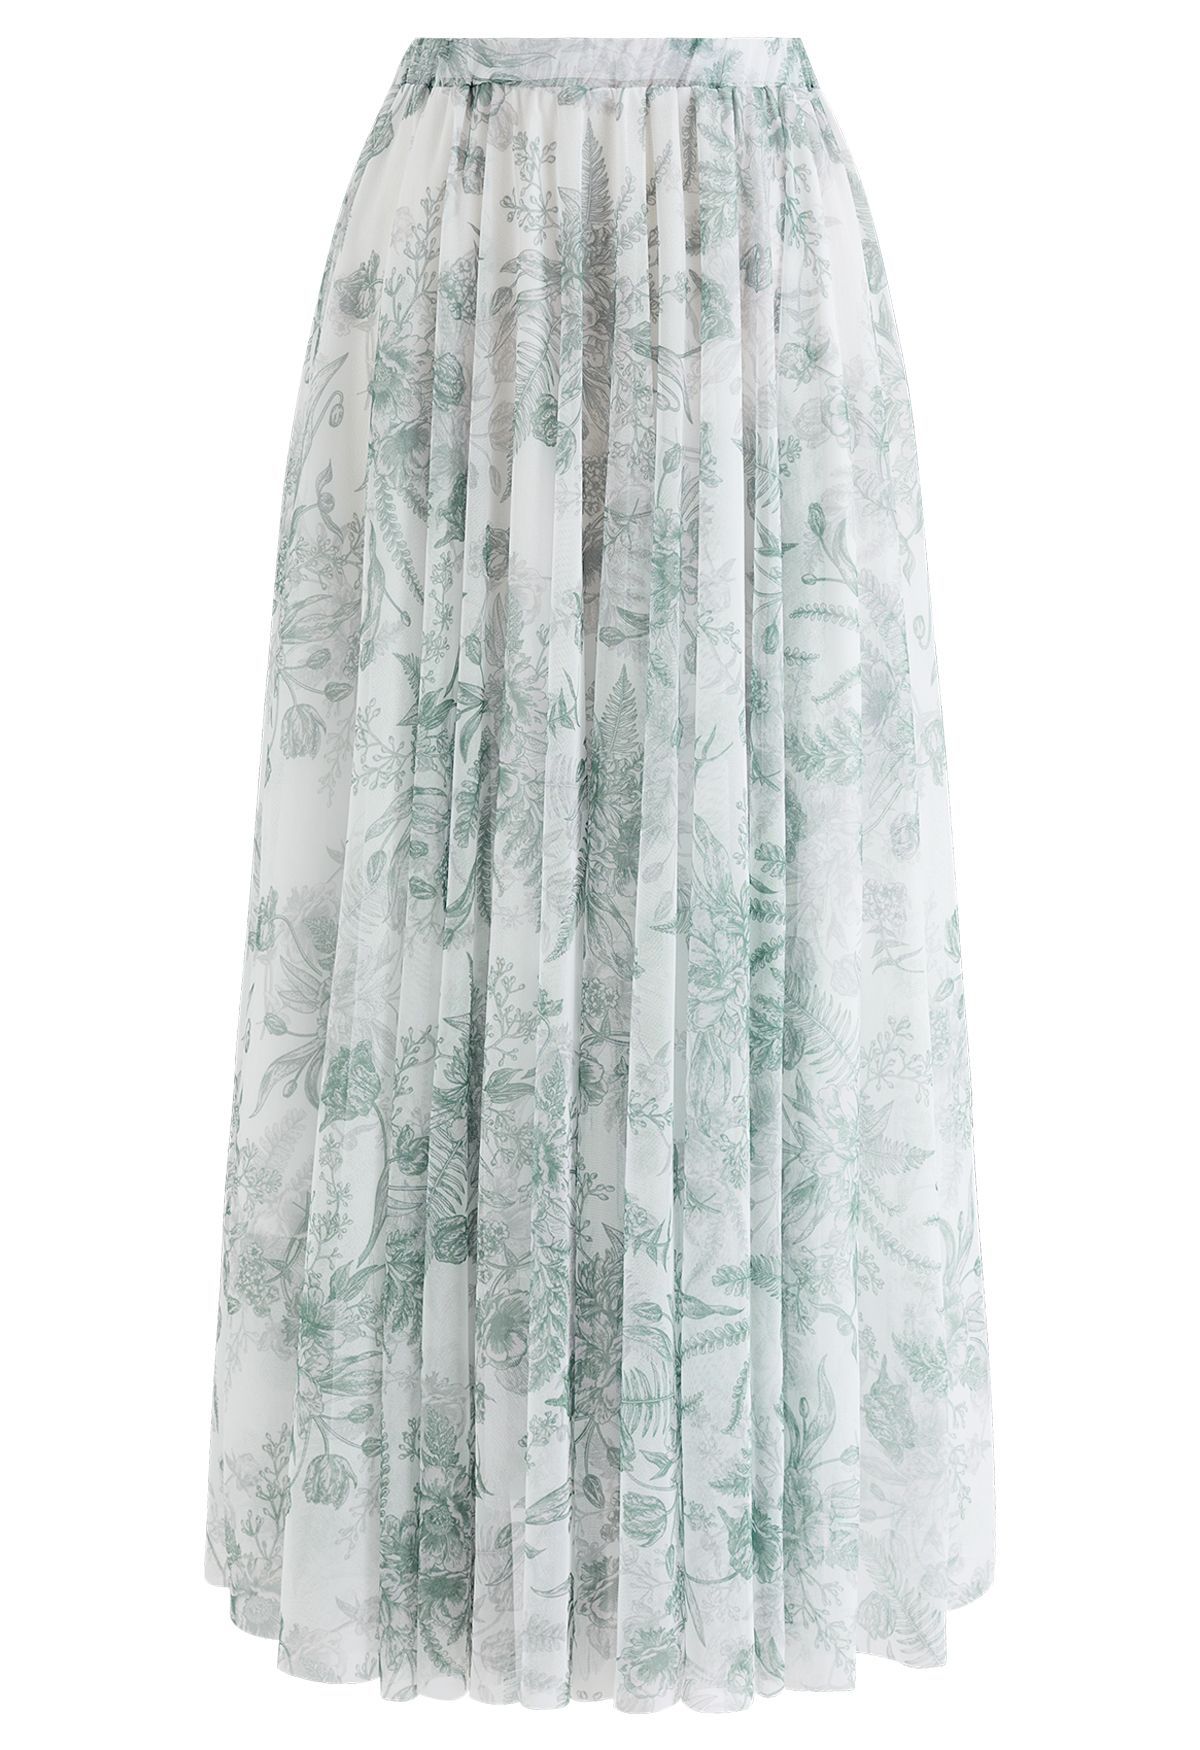 Tranquil Garden Tulle Maxi Skirt in Green | Chicwish